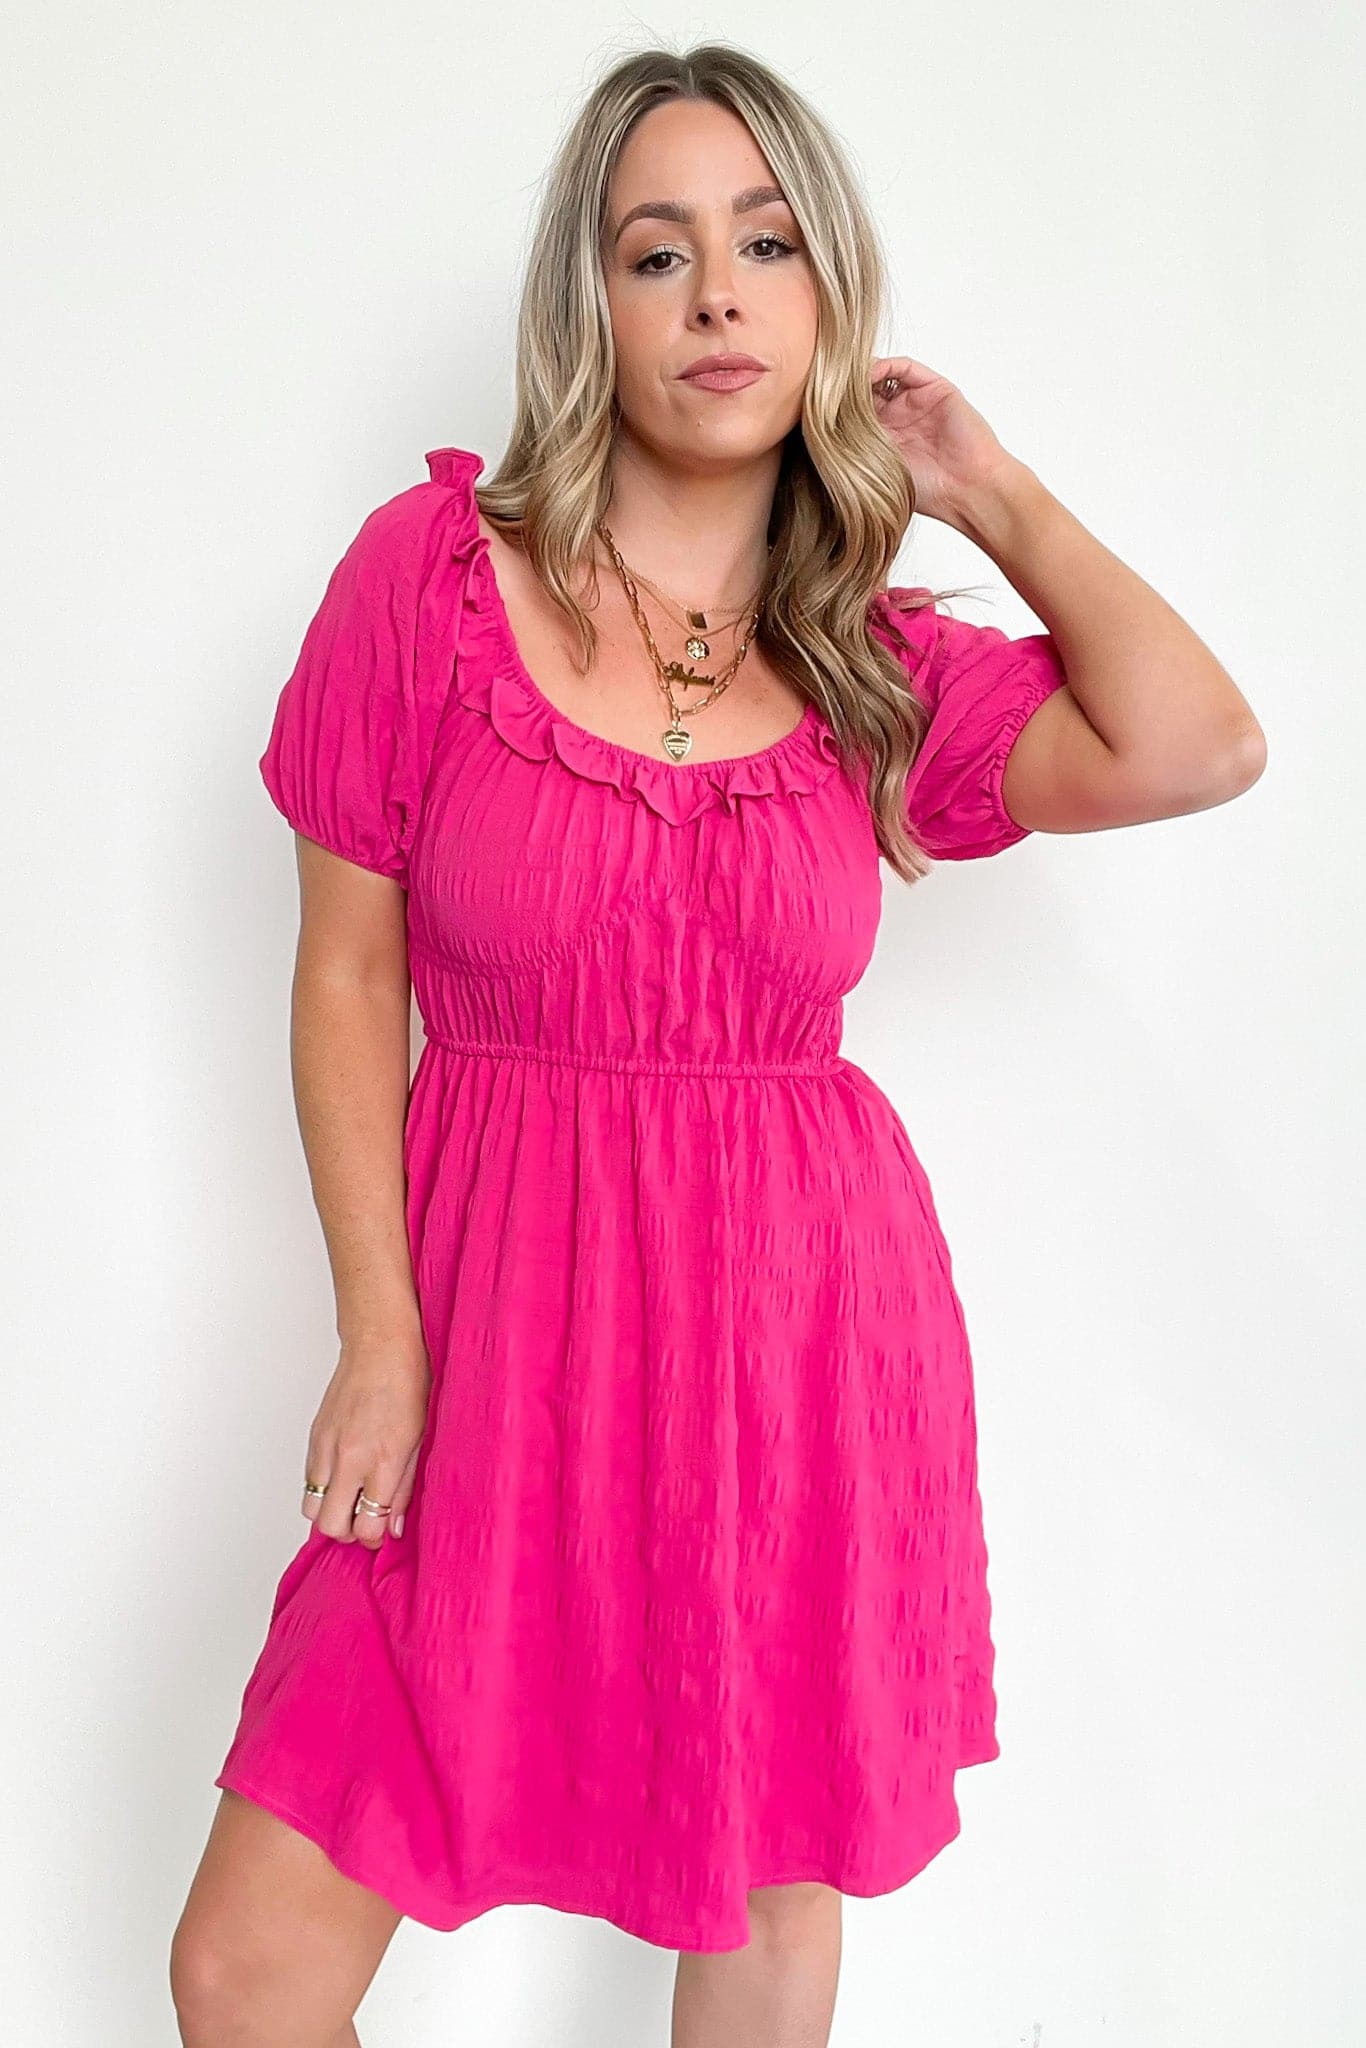  Meren Textured Ruffle Trim Dress - FINAL SALE - Madison and Mallory